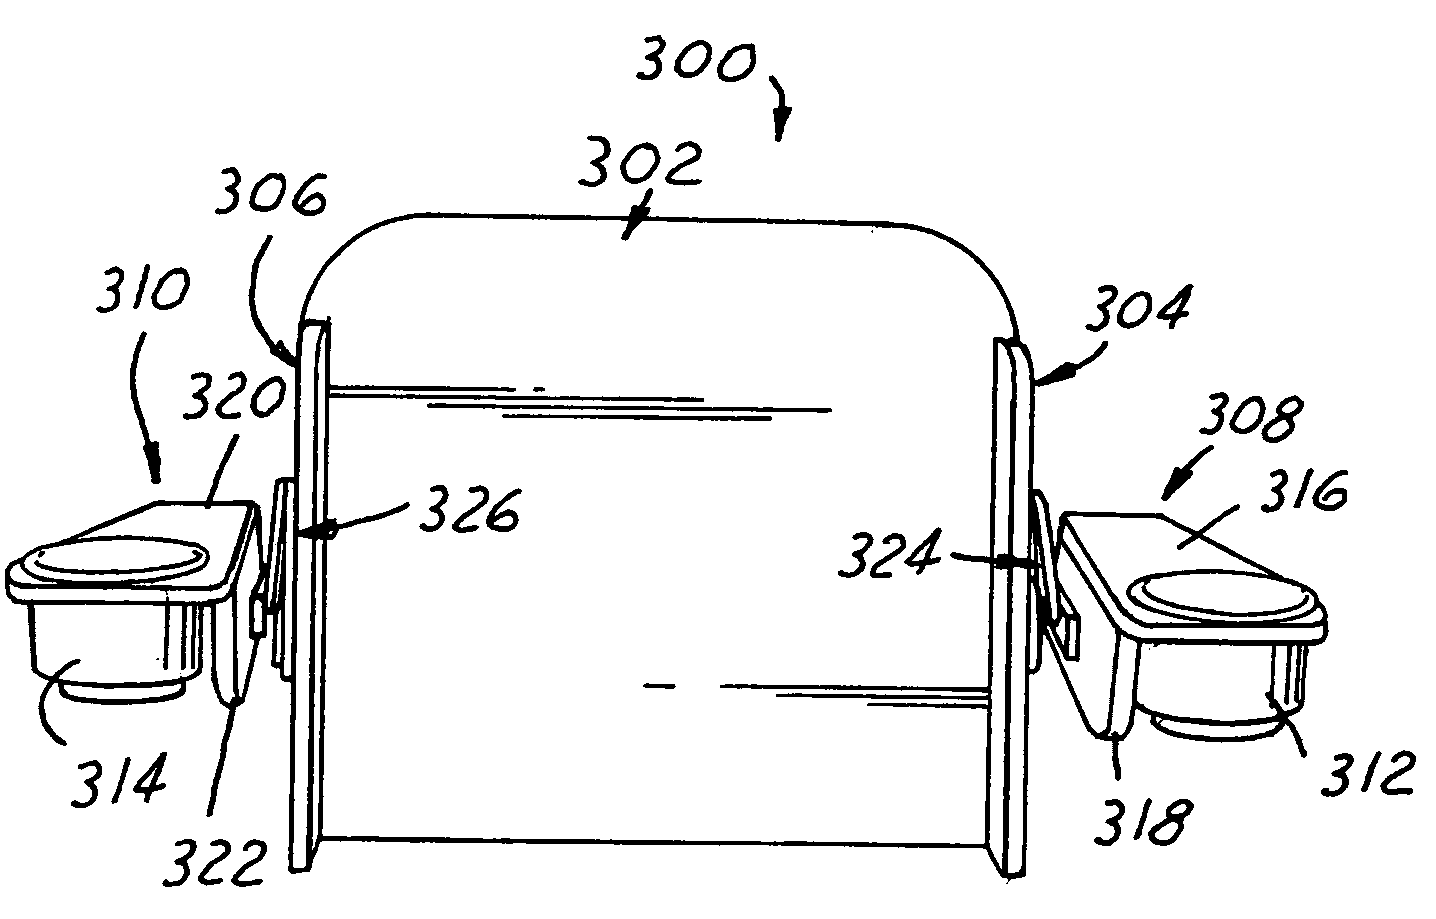 Fold-up marine furniture component with articulated bracket support